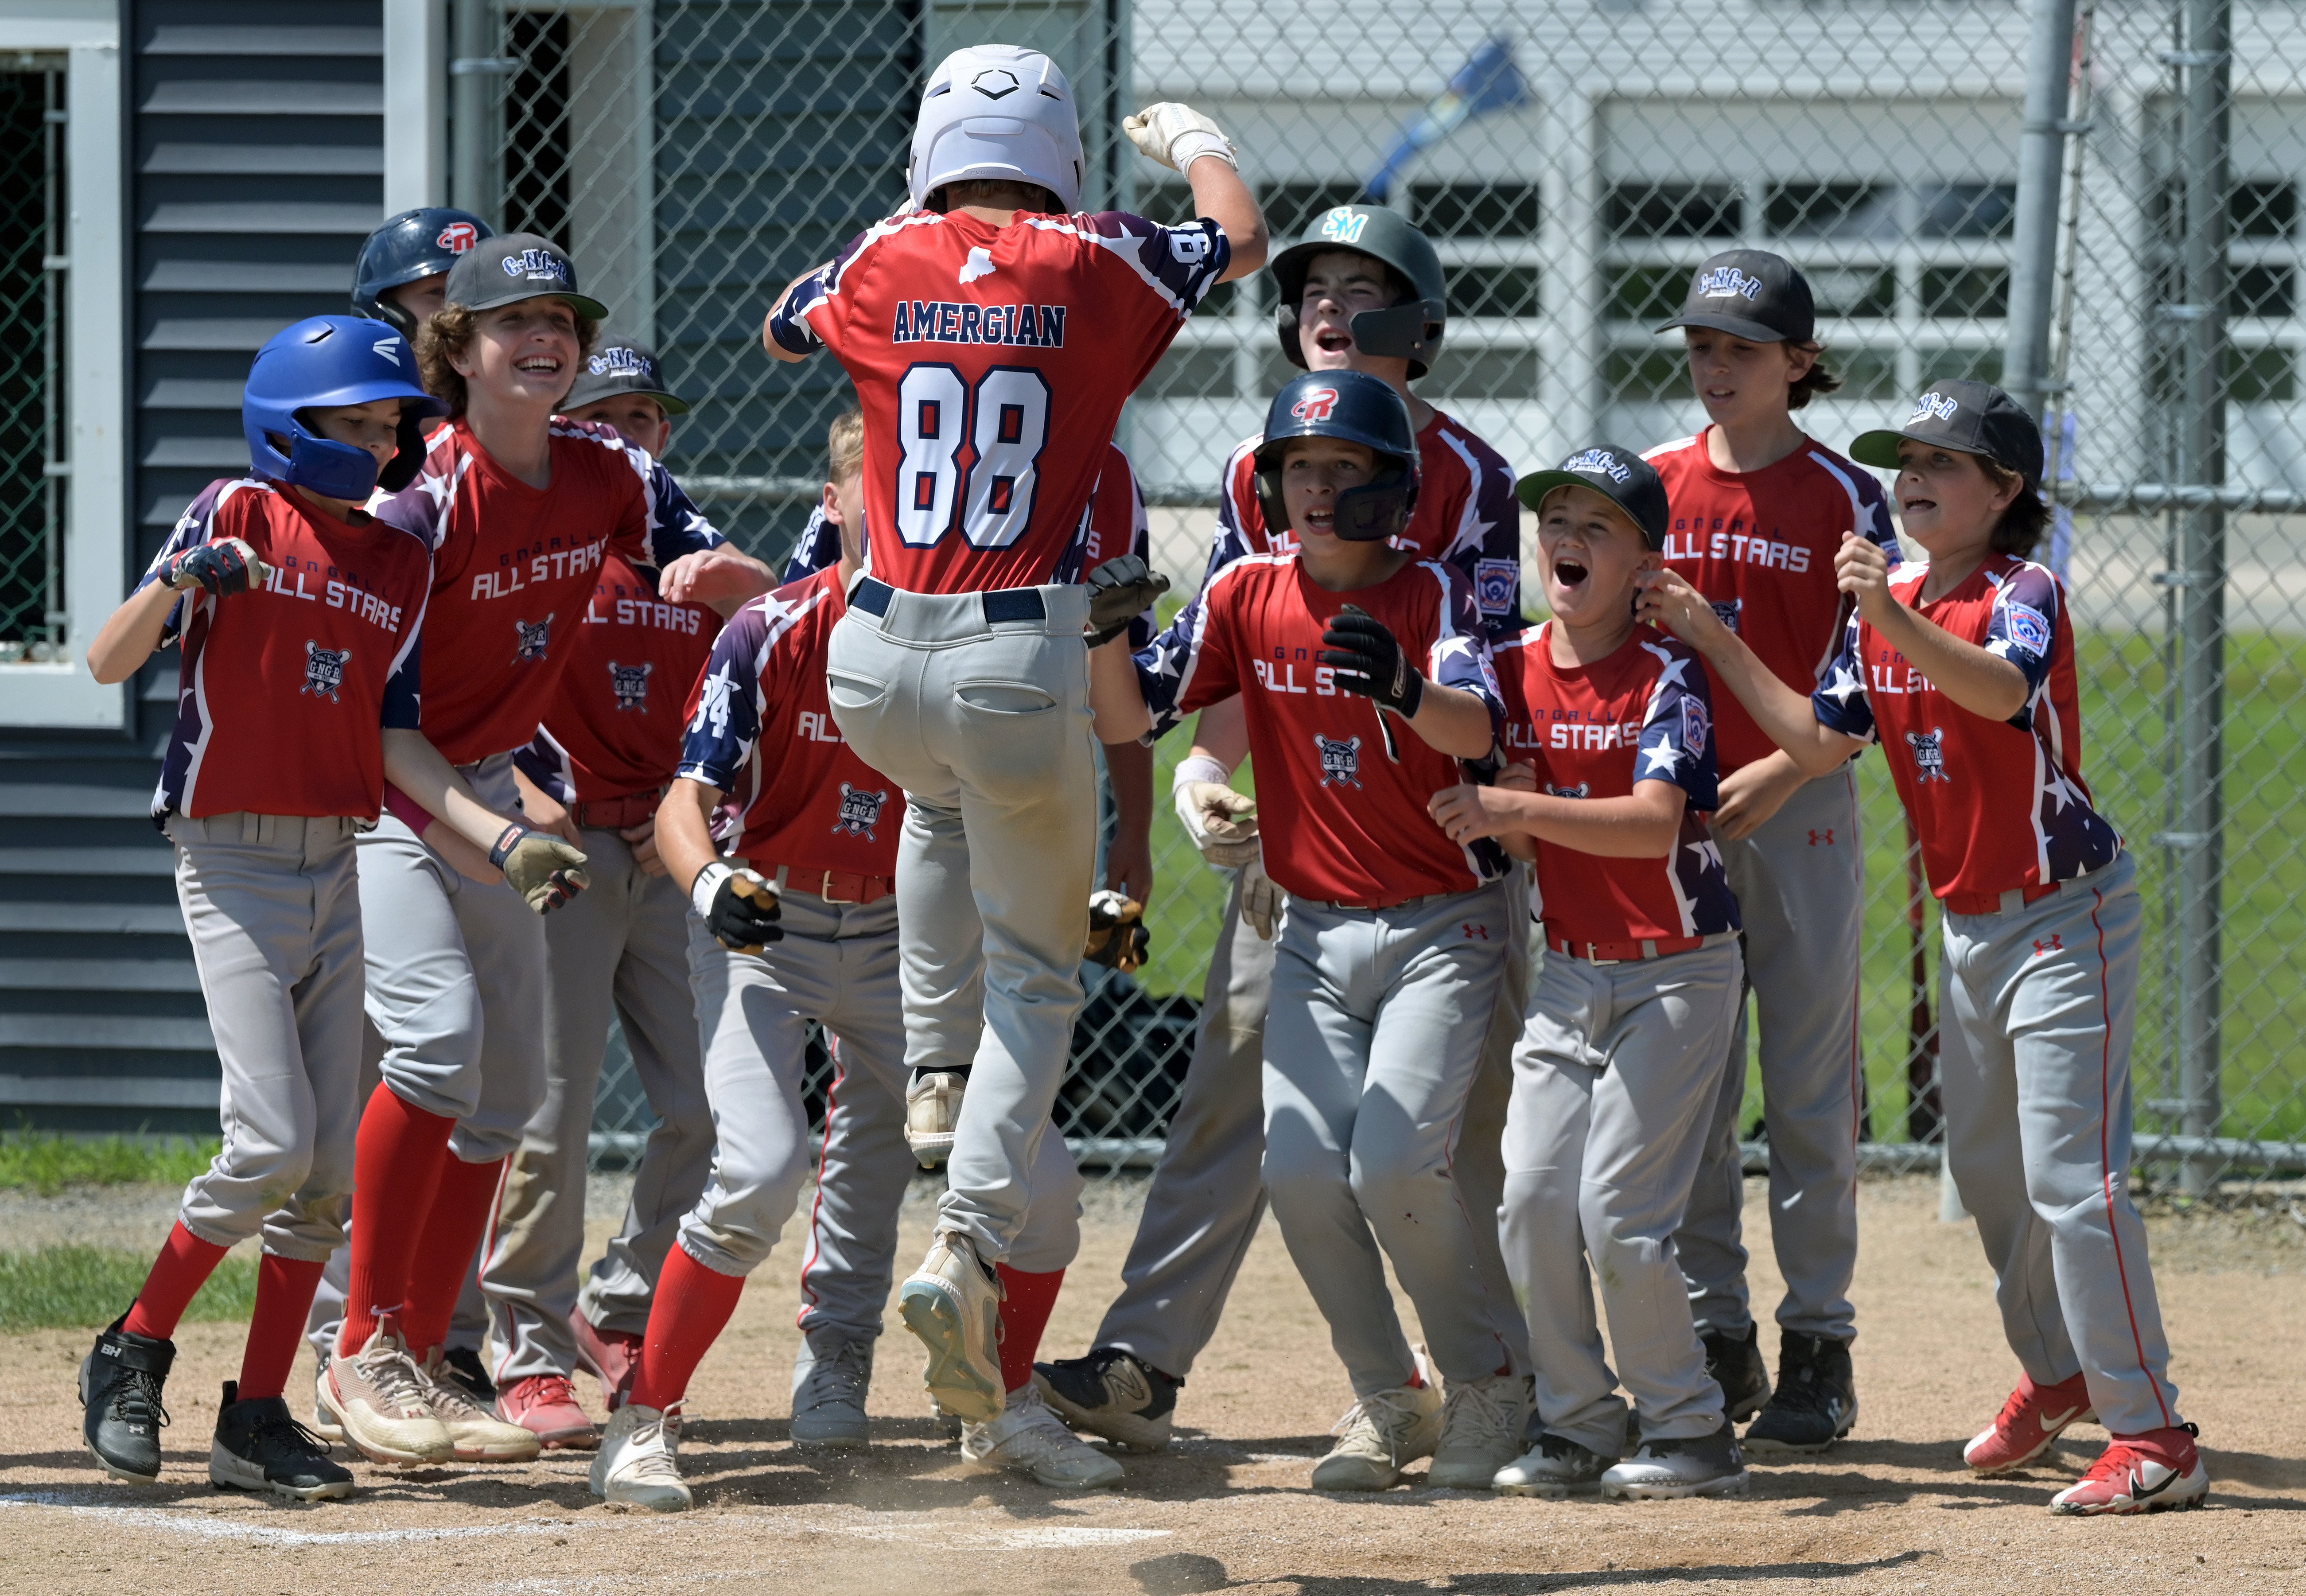 Media loses a close game, 2-1, to Needville in Little League World